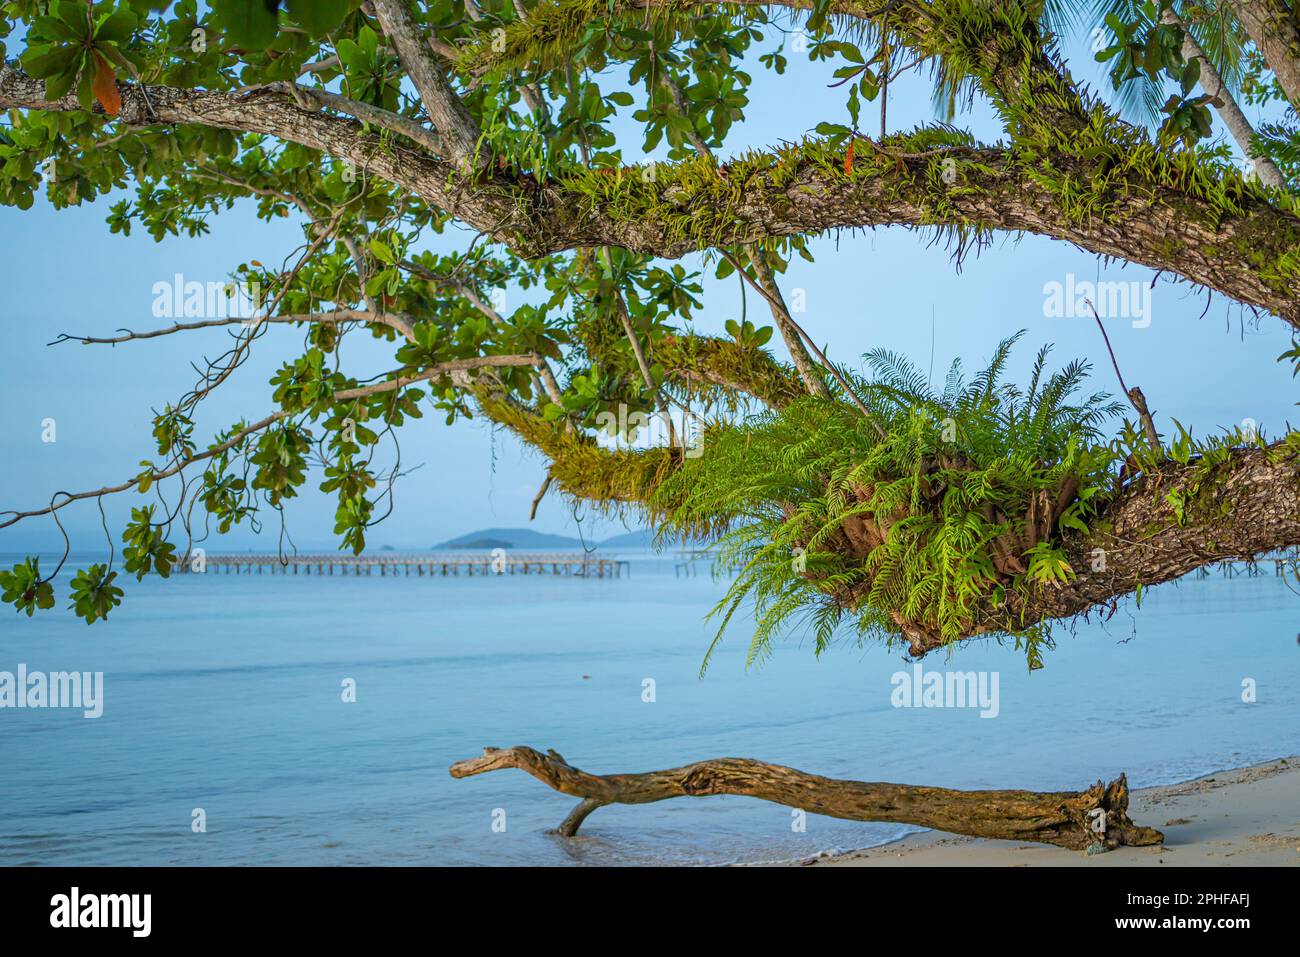 A tree with fern plant at the coastline at the village Saporkren on Waisai island, Raja Ampat, West Papua Stock Photo